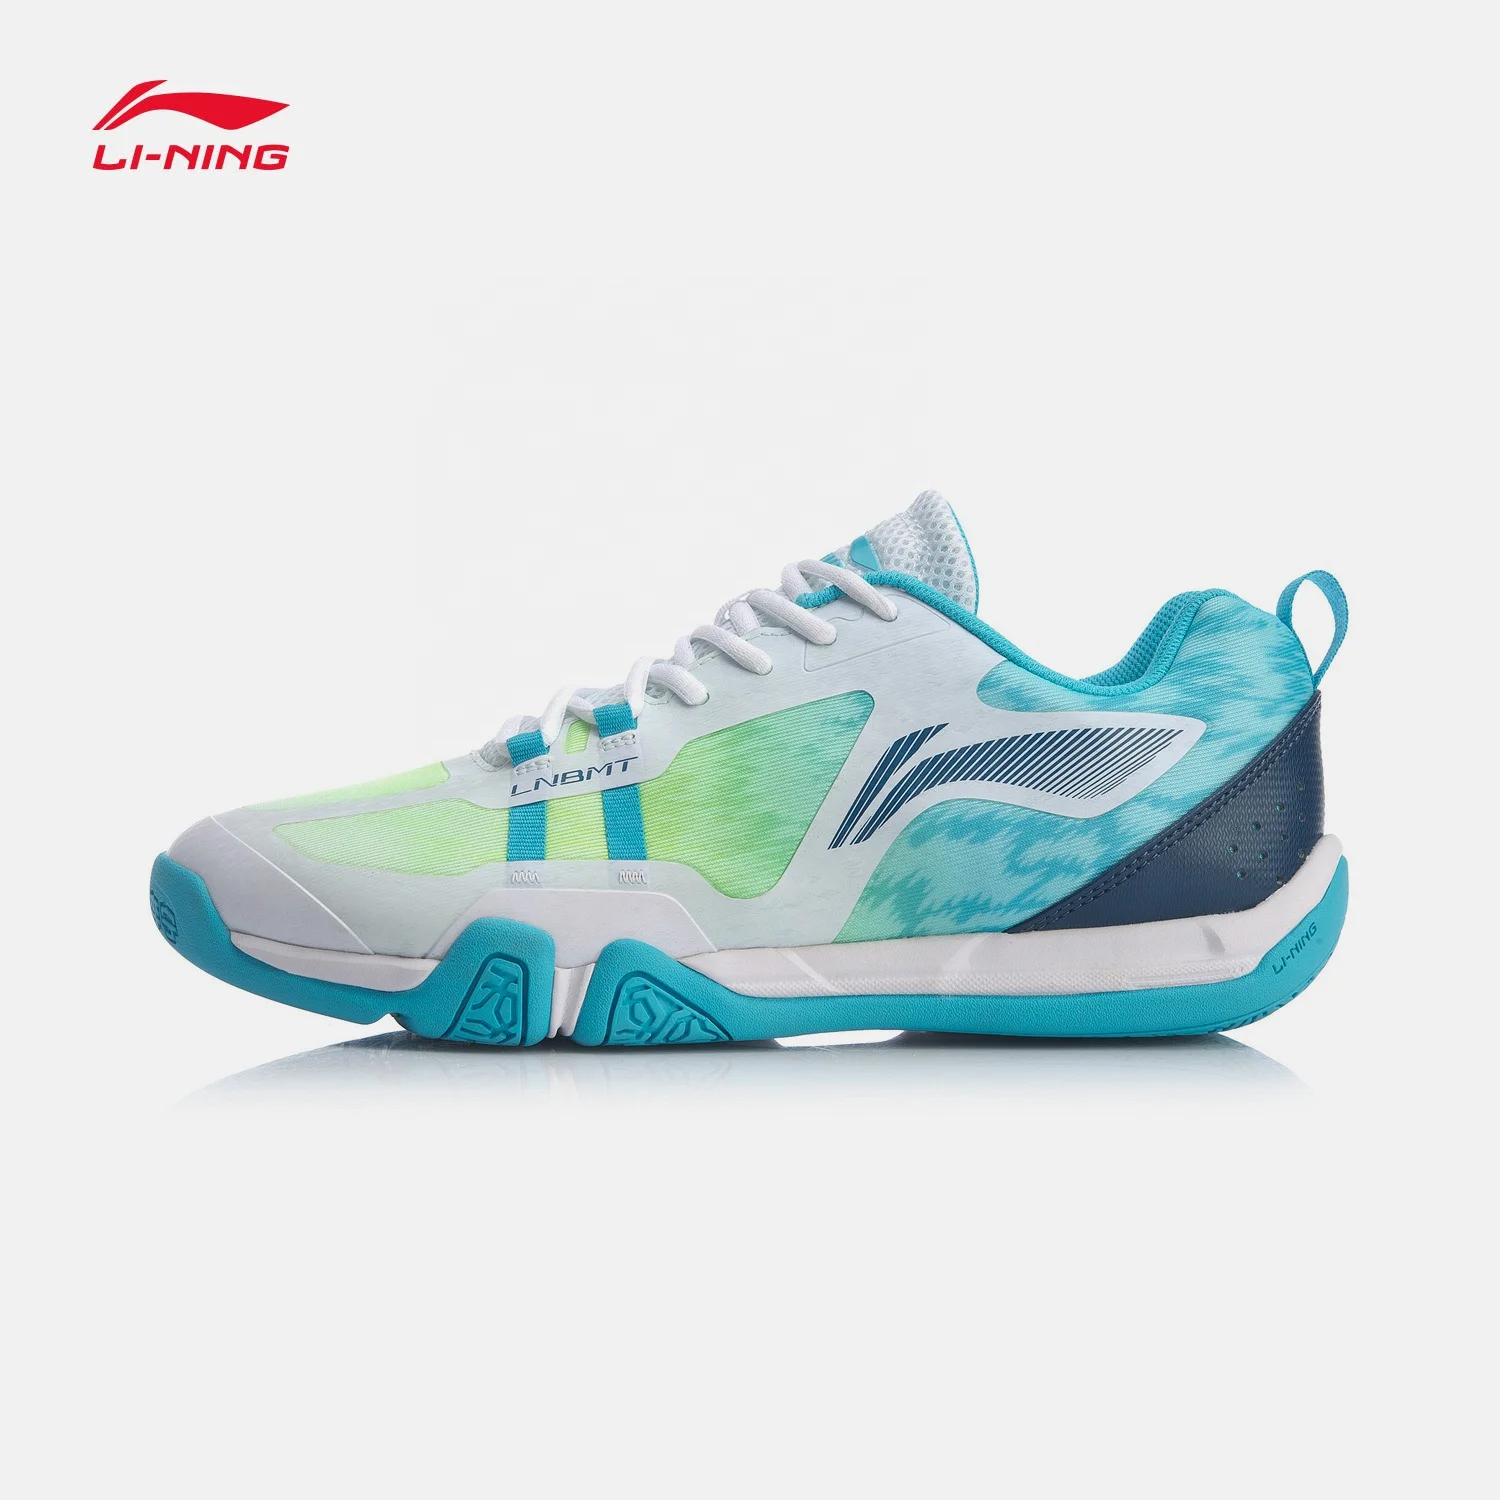 

LINING Men Badminton Shoes Antiskid Support Sneaker Fitness Sports Shoes for li ning support badminton training shoes AYTQ037